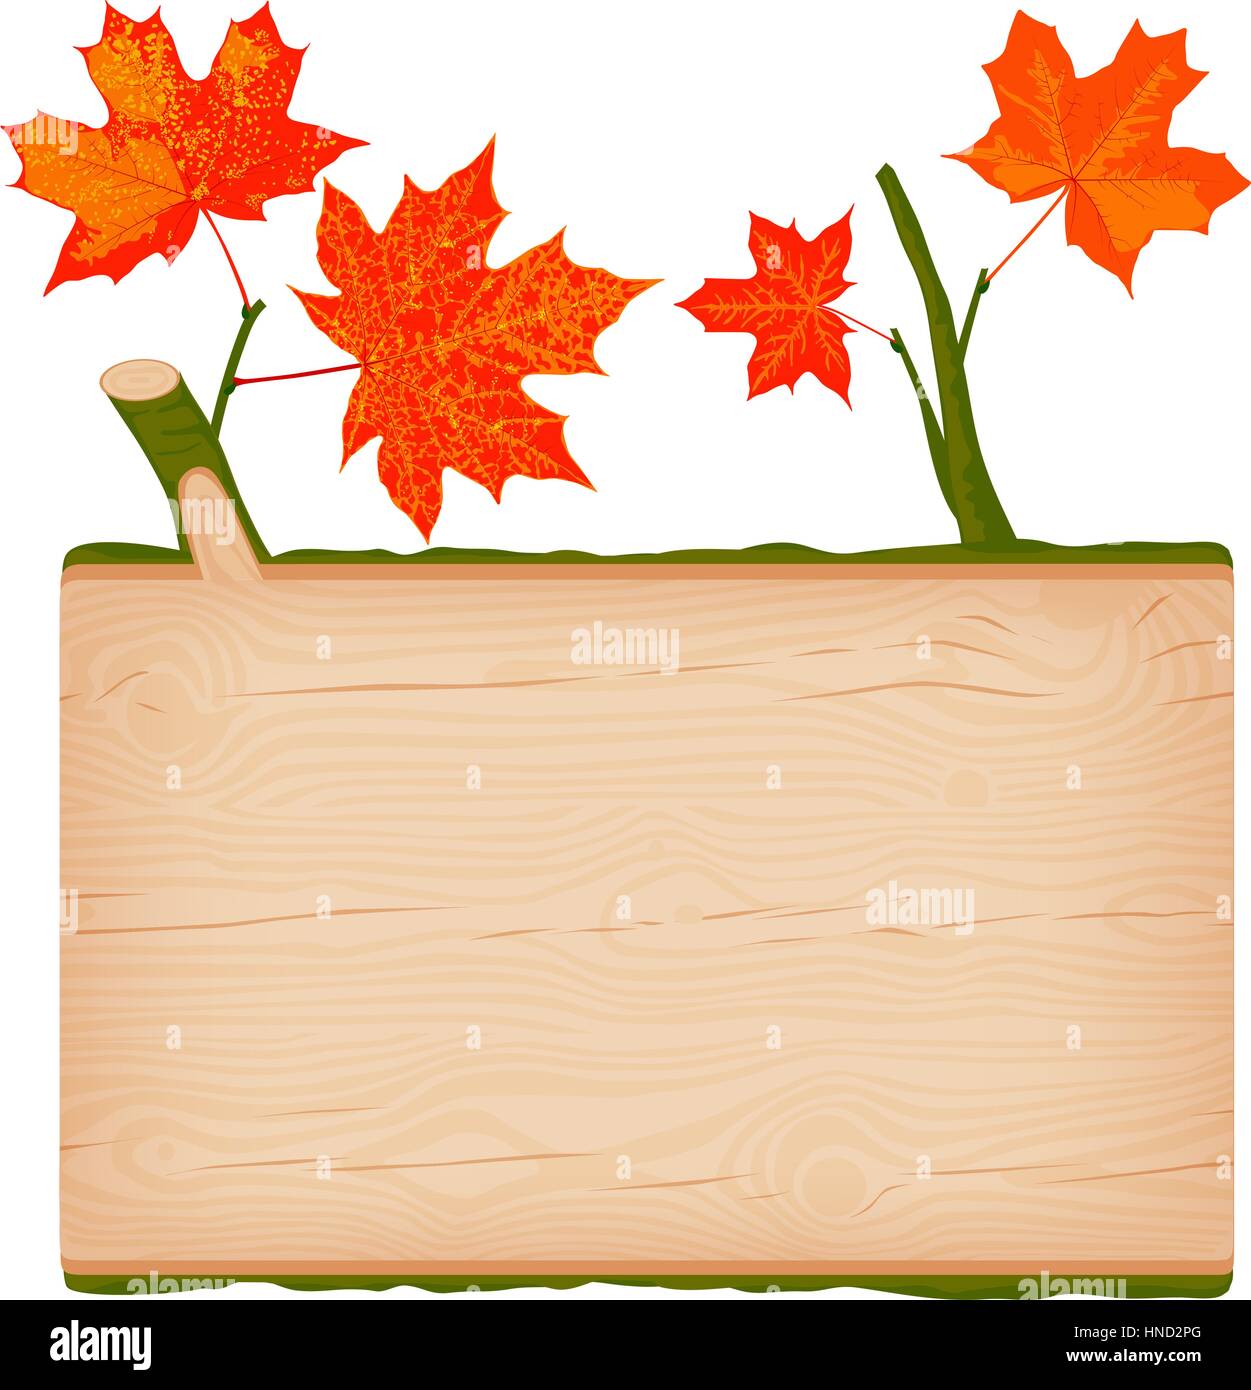 Natural textured maple wooden rectangular signboard with red autumn leaves vector illustration Stock Vector